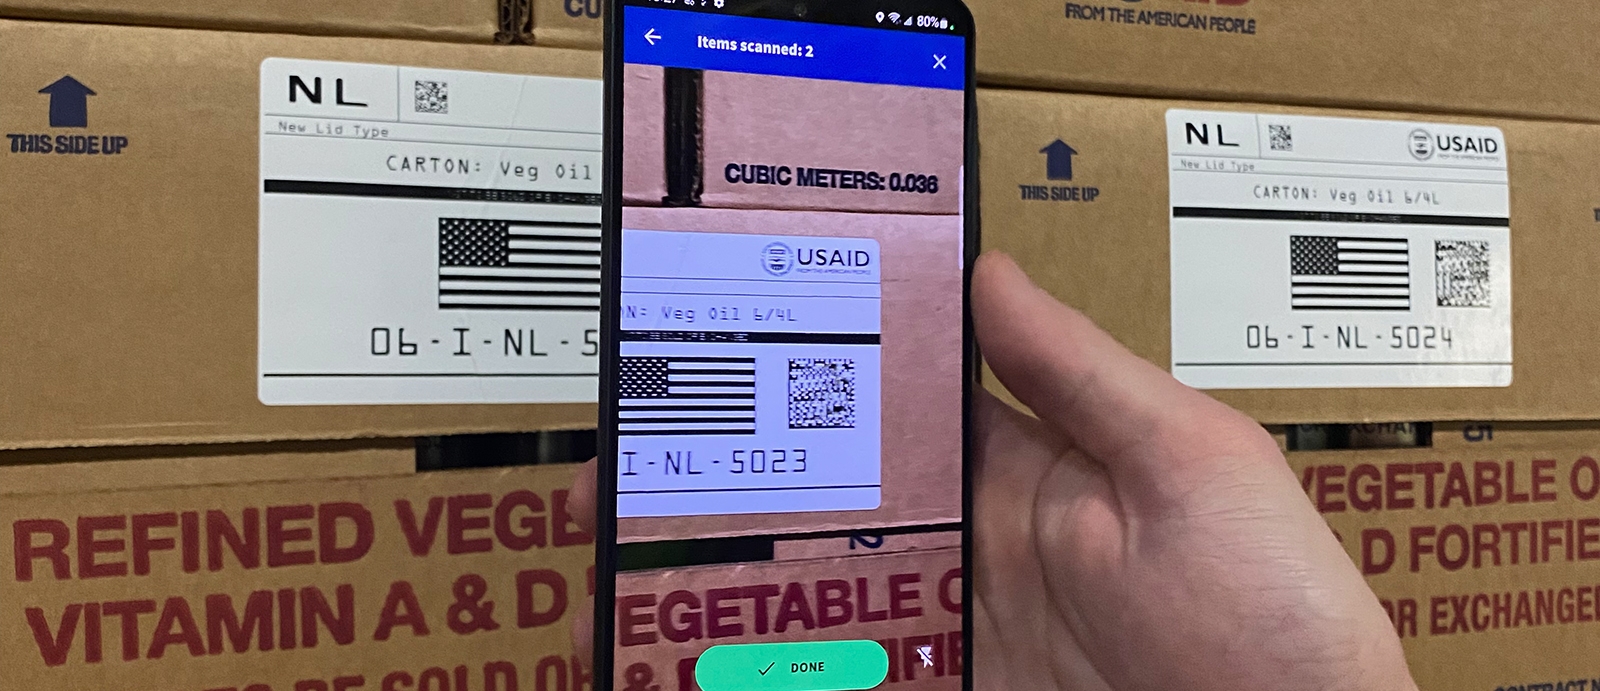 A person holds a smartphone scanner in front of a barcoded box.